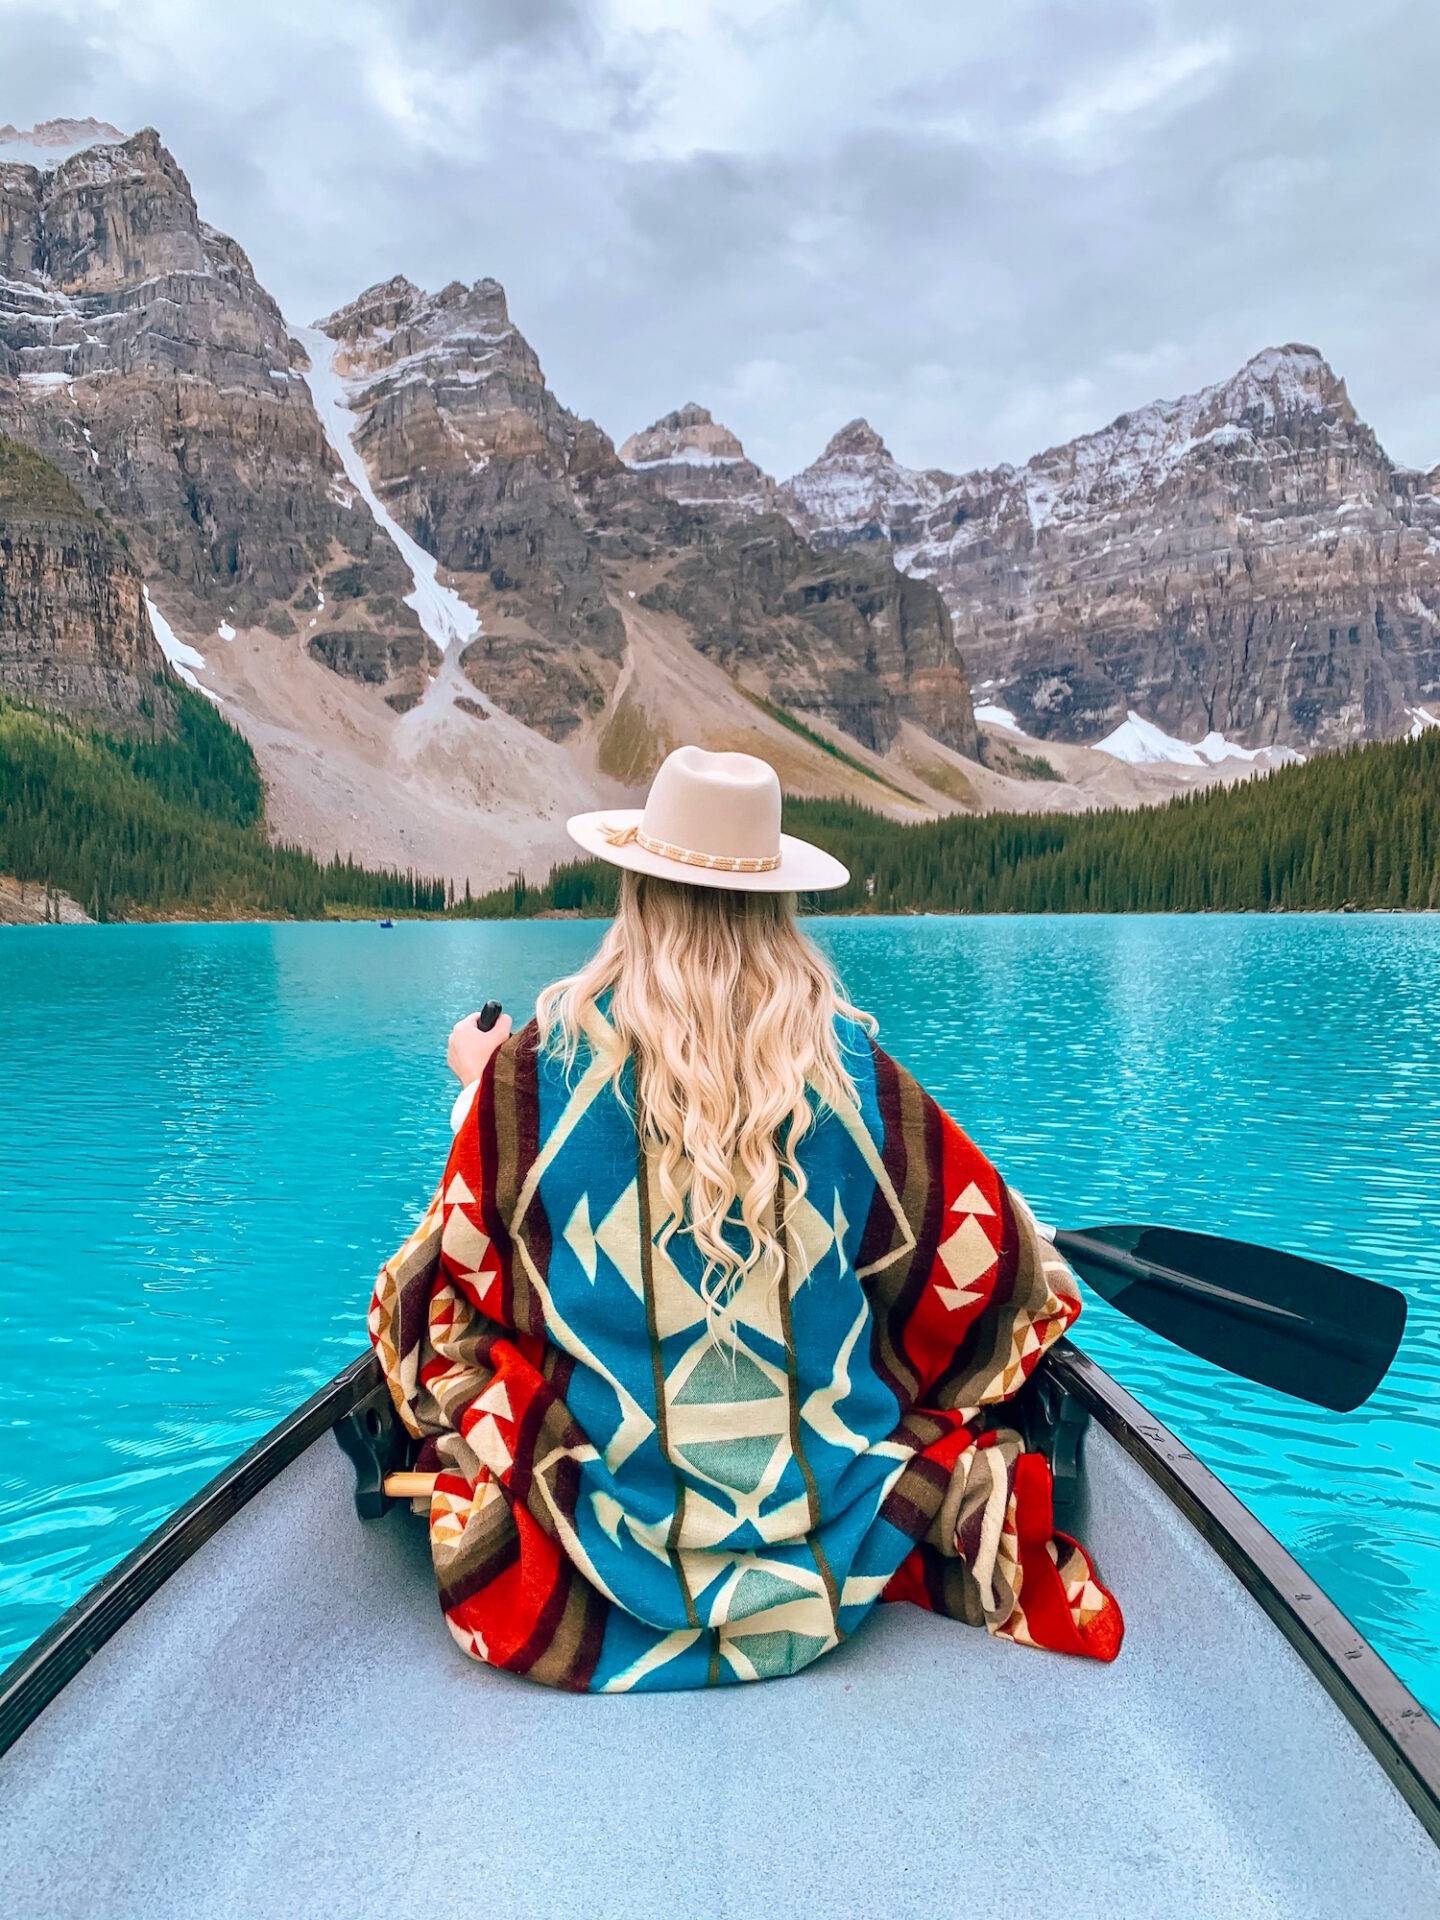 Visiting Banff National Park soon? Don't miss this guide of the 50 best things to in Banff for every kind of traveler! I recently spent 8 days exploring the area and took notes along the way so I could write you the most comprehensive guide possible. This guide includes all the top attractions, hikes, restaurants, and sights you definitely won't want to miss when you visit Banff National Park. I also include any tips you might need when visiting the area! Pictured here: Canoeing on Moraine Lake